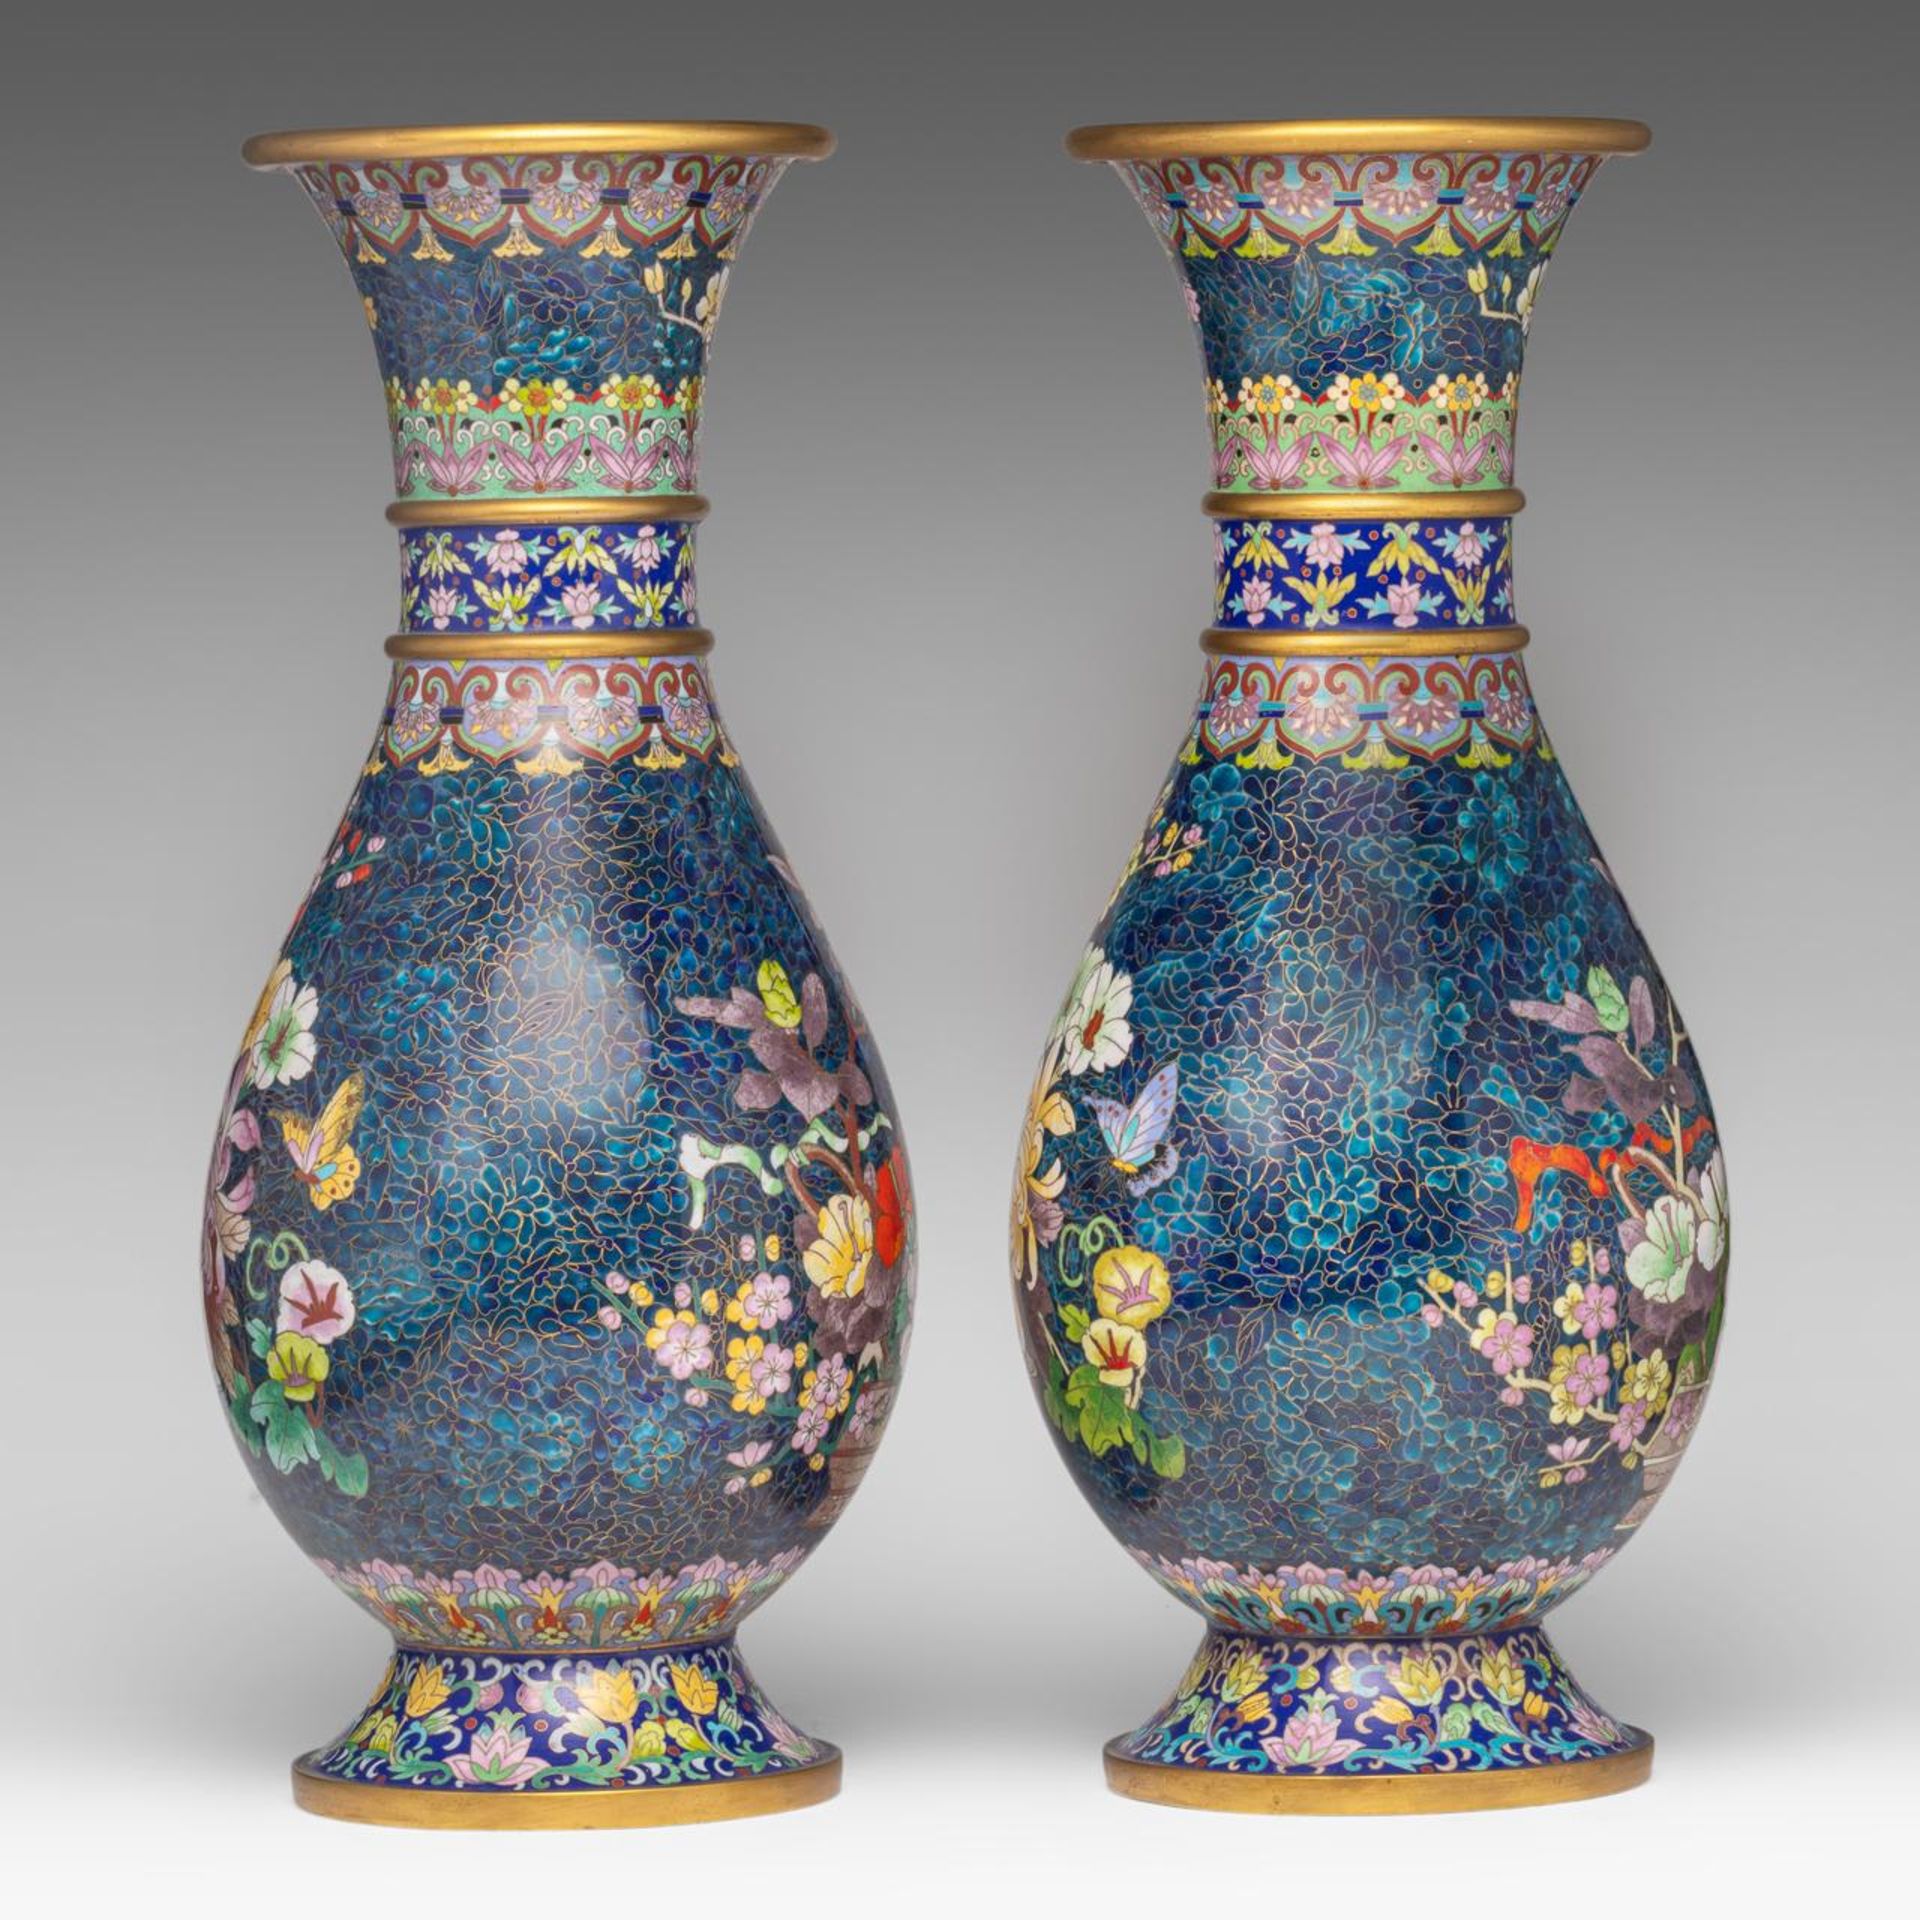 A pair of Chinese cloisonne enamelled 'Flower basket' vases, 20thC, H 52,5 cm - Image 2 of 6